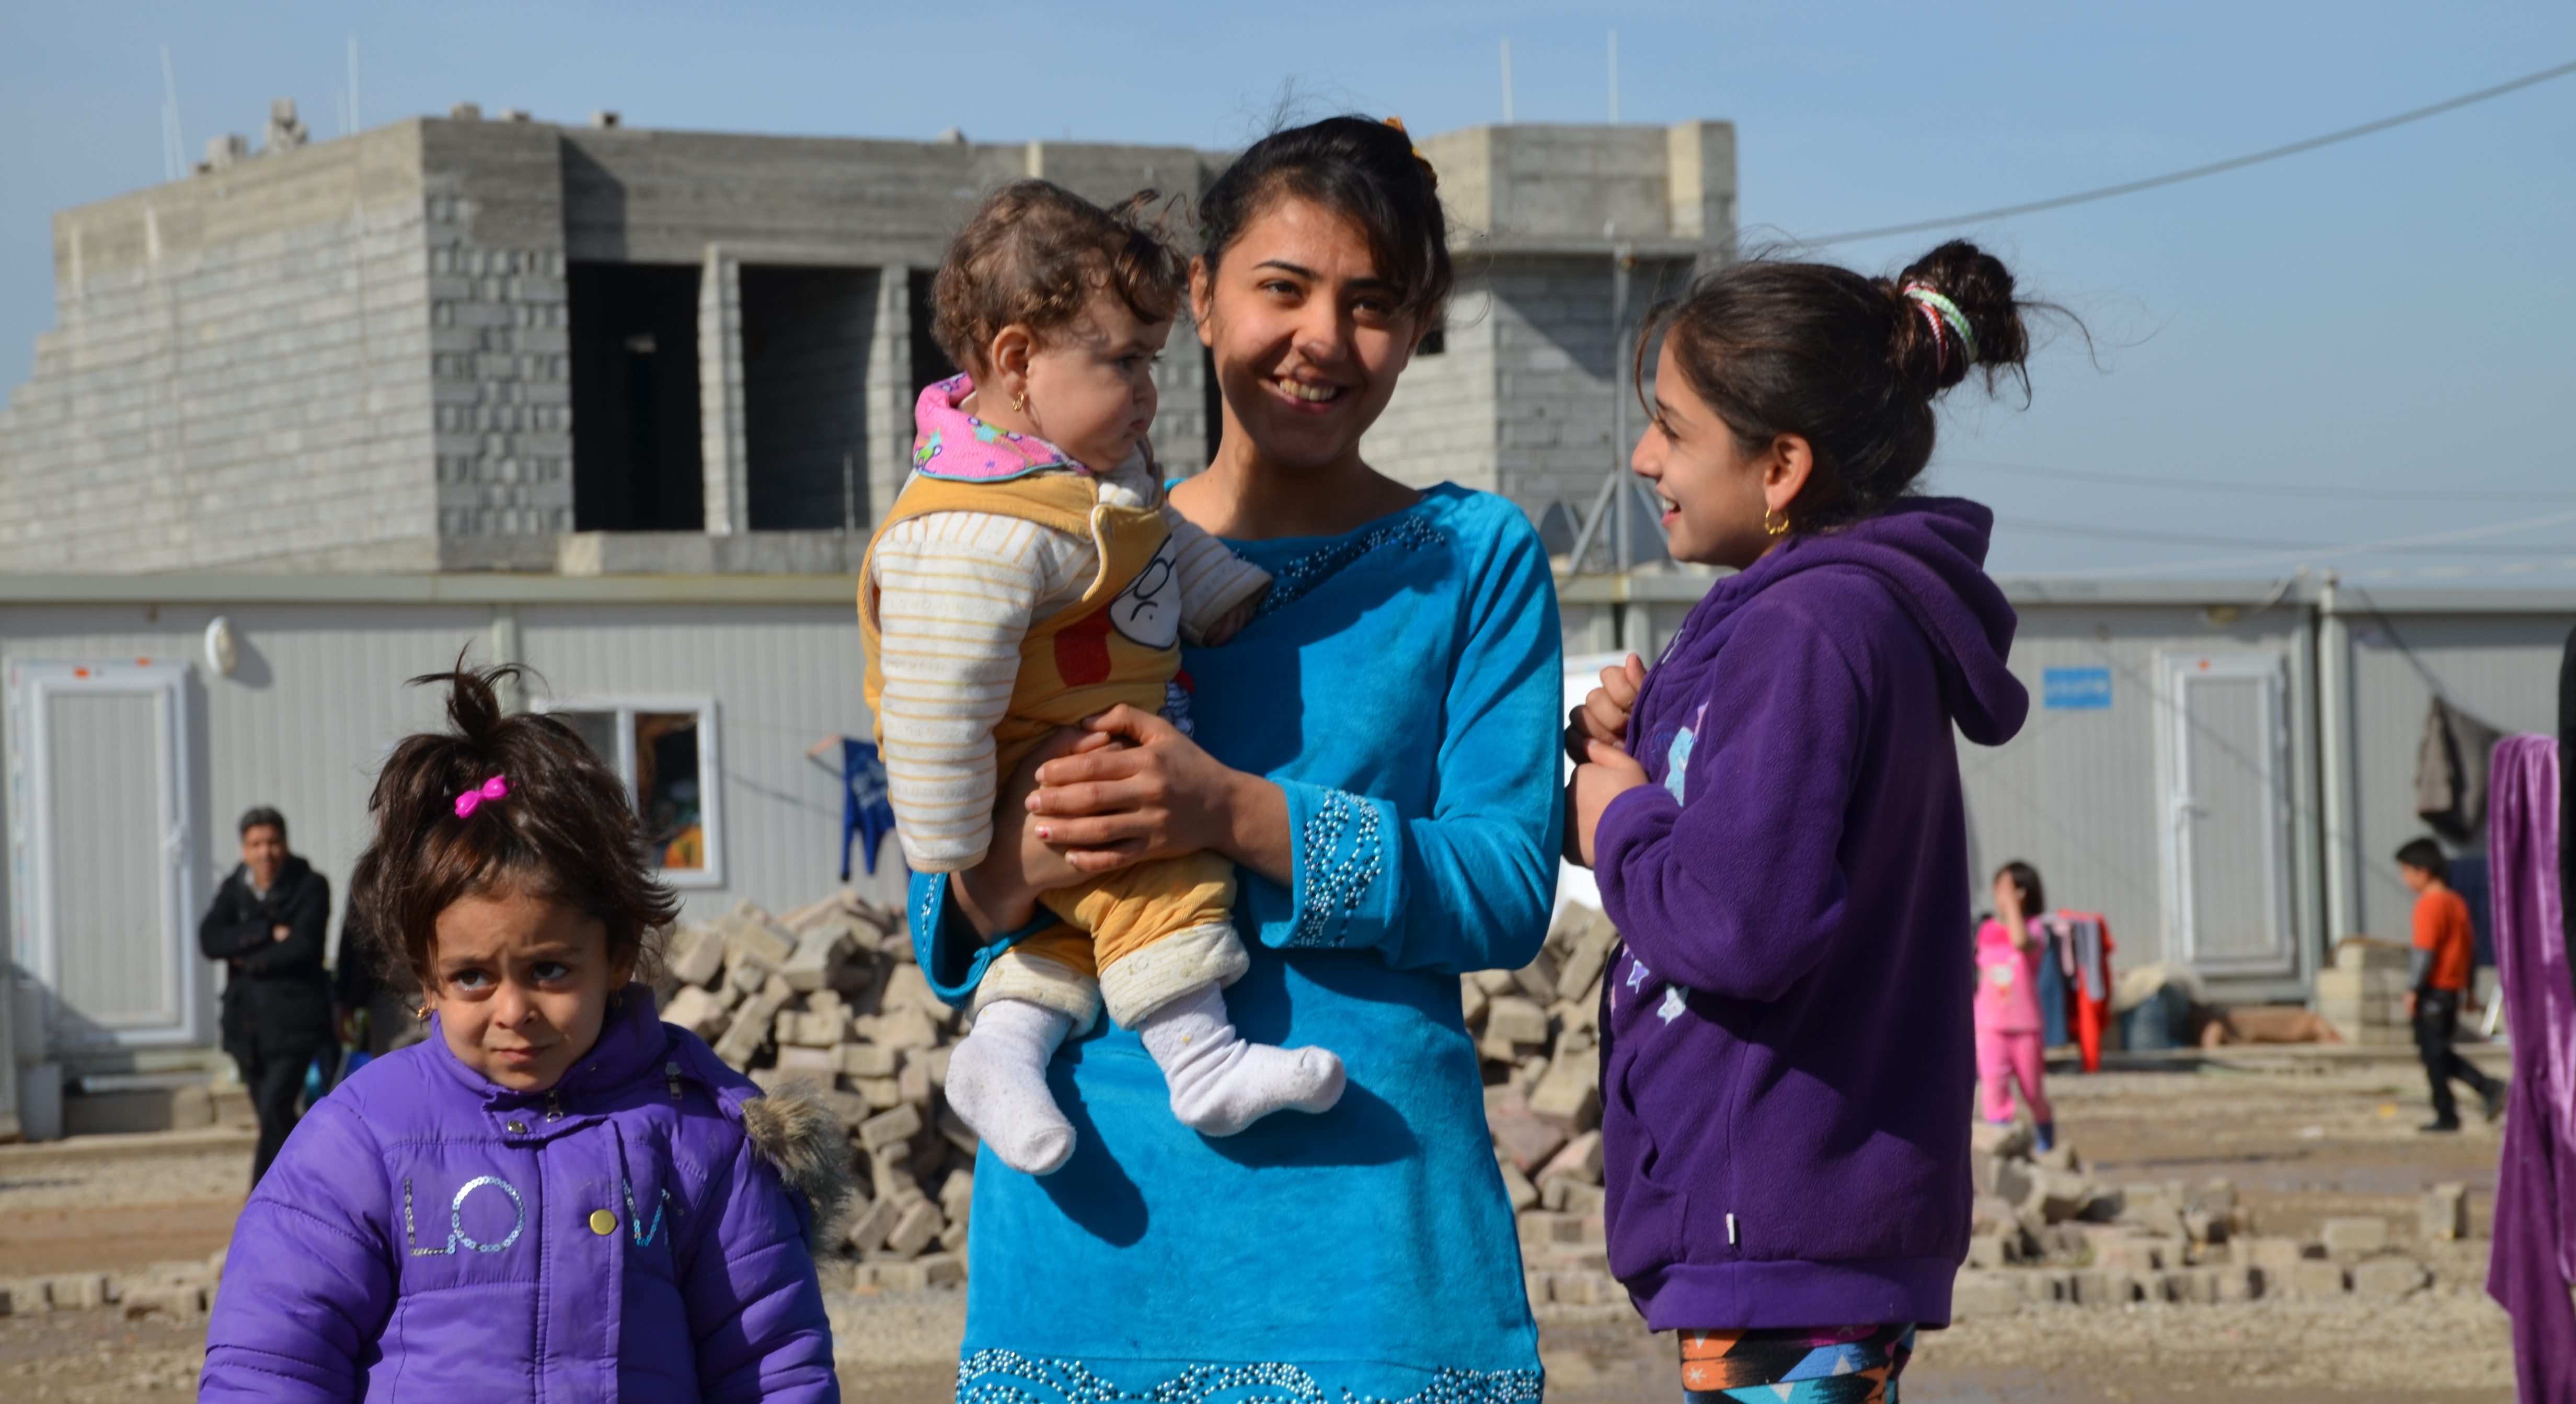 Christian refugees in the Middle East (© Aid to the Church in Need)